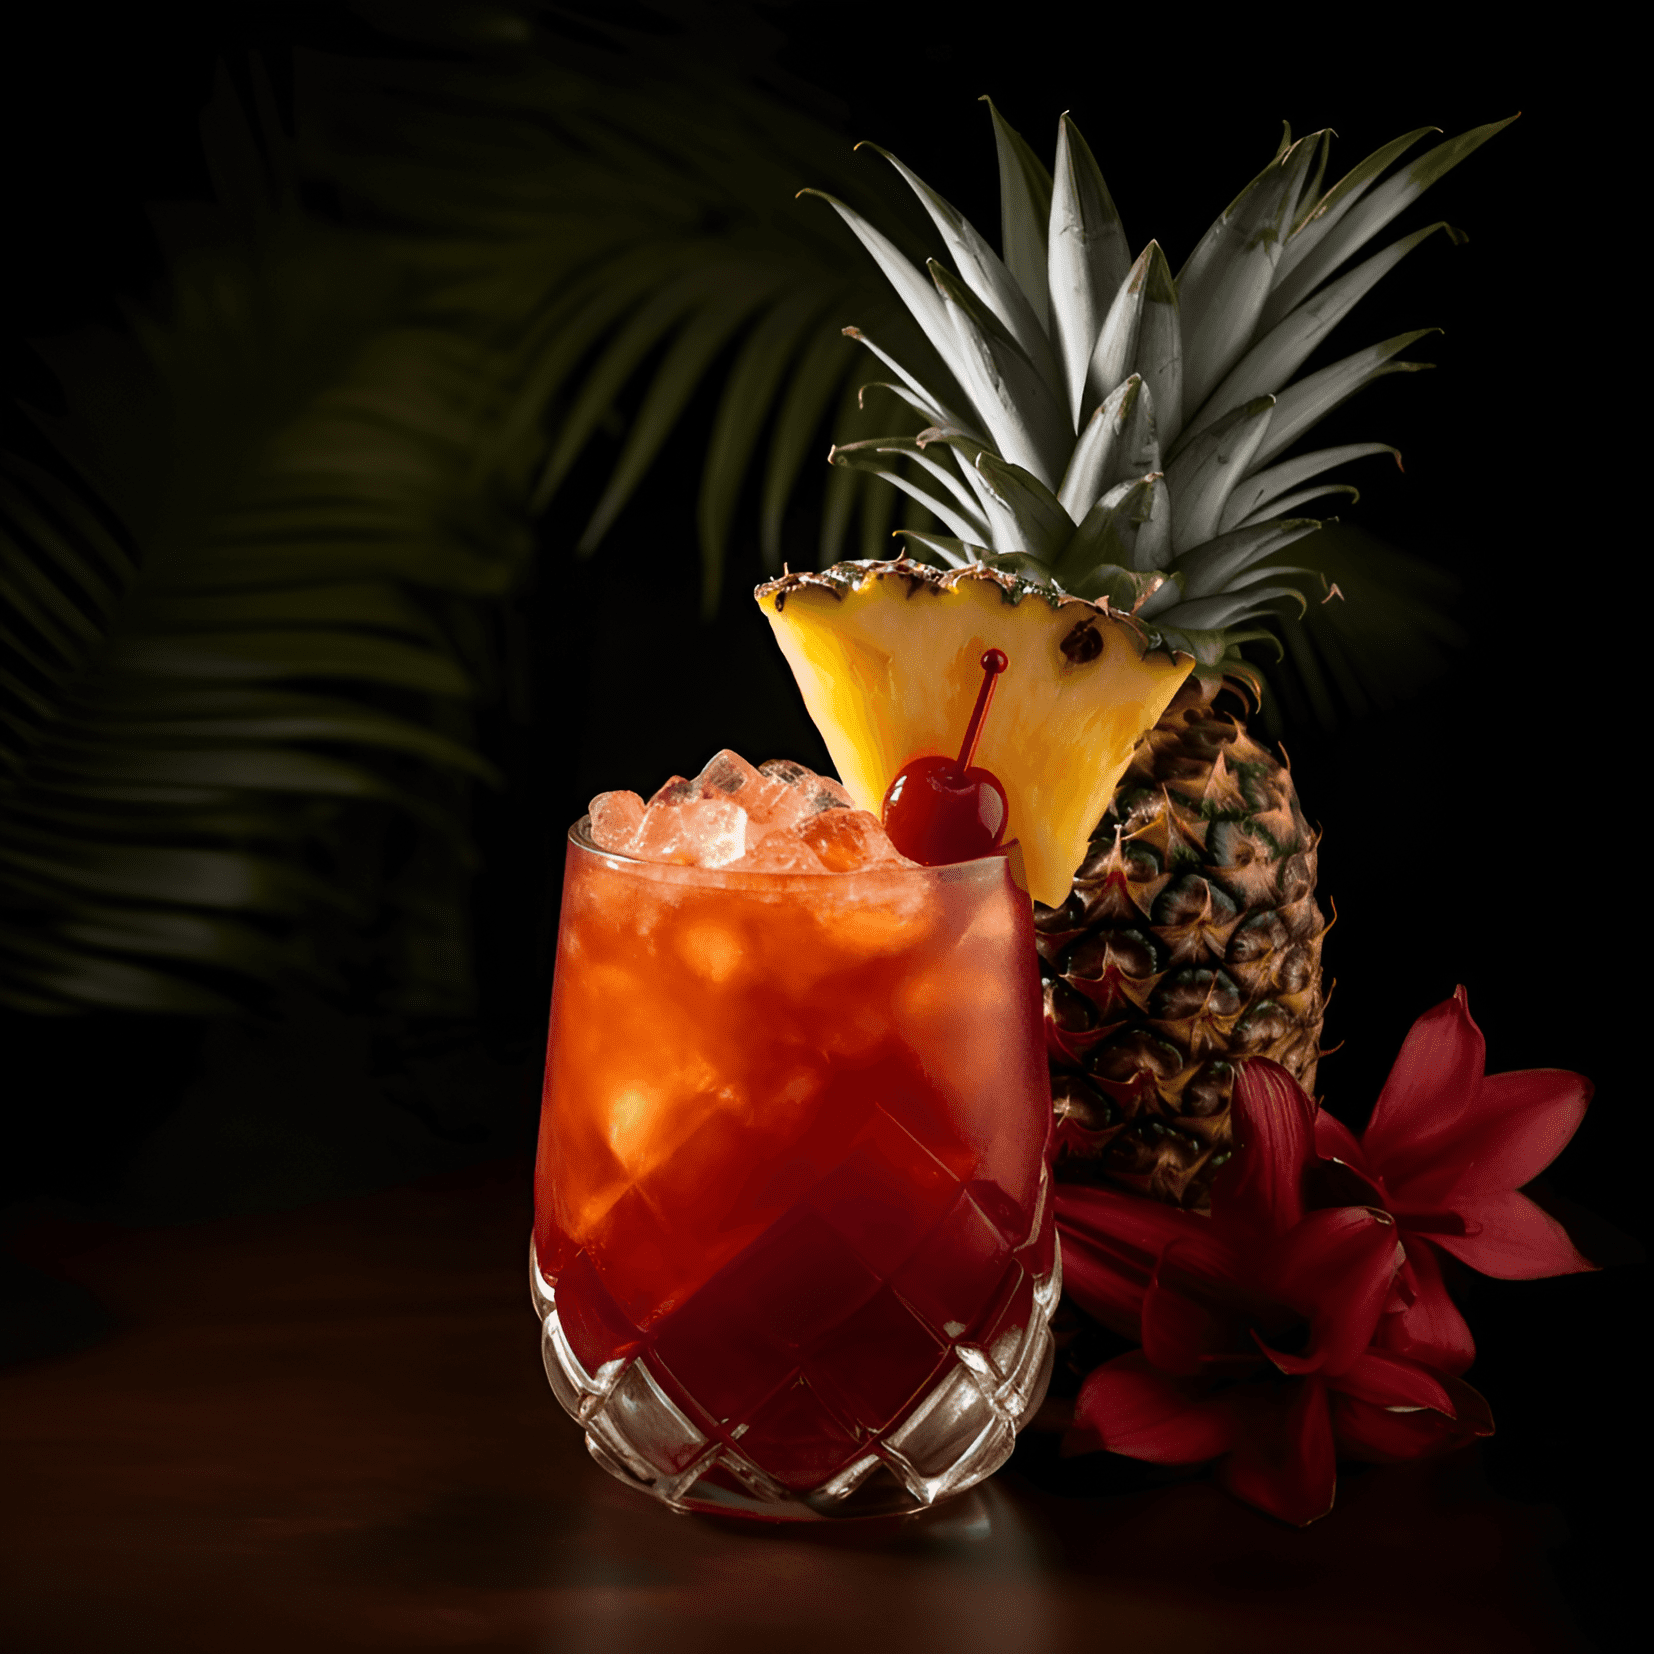 The Jungle Bird has a complex and well-balanced taste profile, featuring sweet, sour, and bitter notes. The sweetness of the pineapple juice is balanced by the tartness of the lime juice and the bitterness of the Campari. The dark rum adds depth and warmth to the drink.